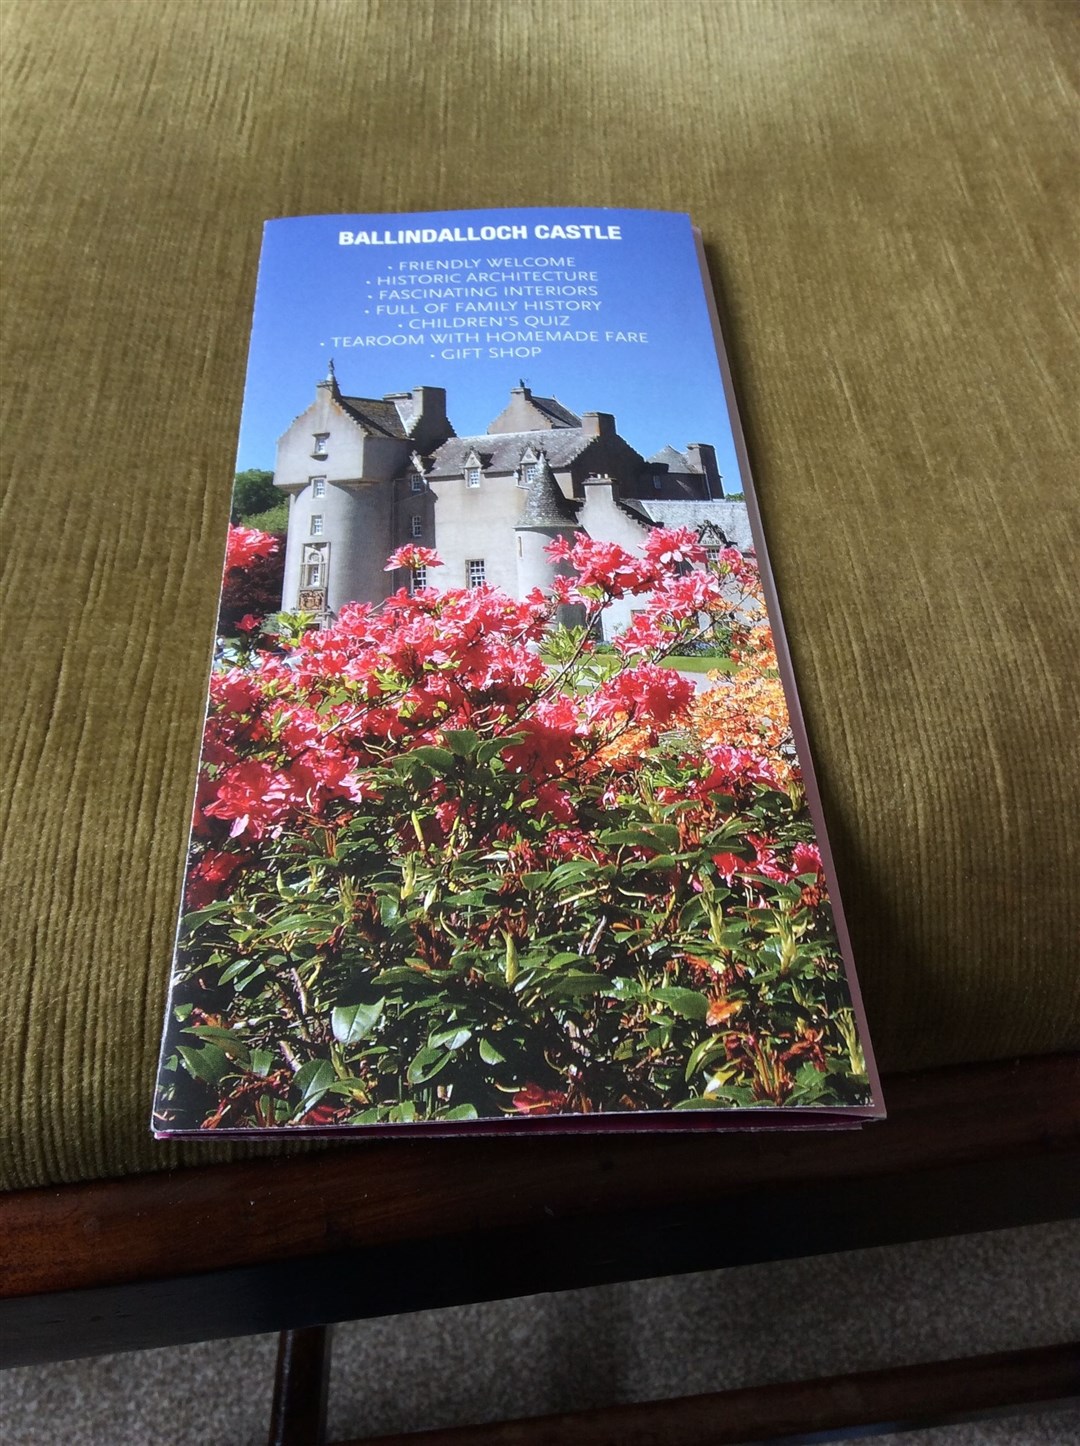 A brochure picked up on the visit to the castle.